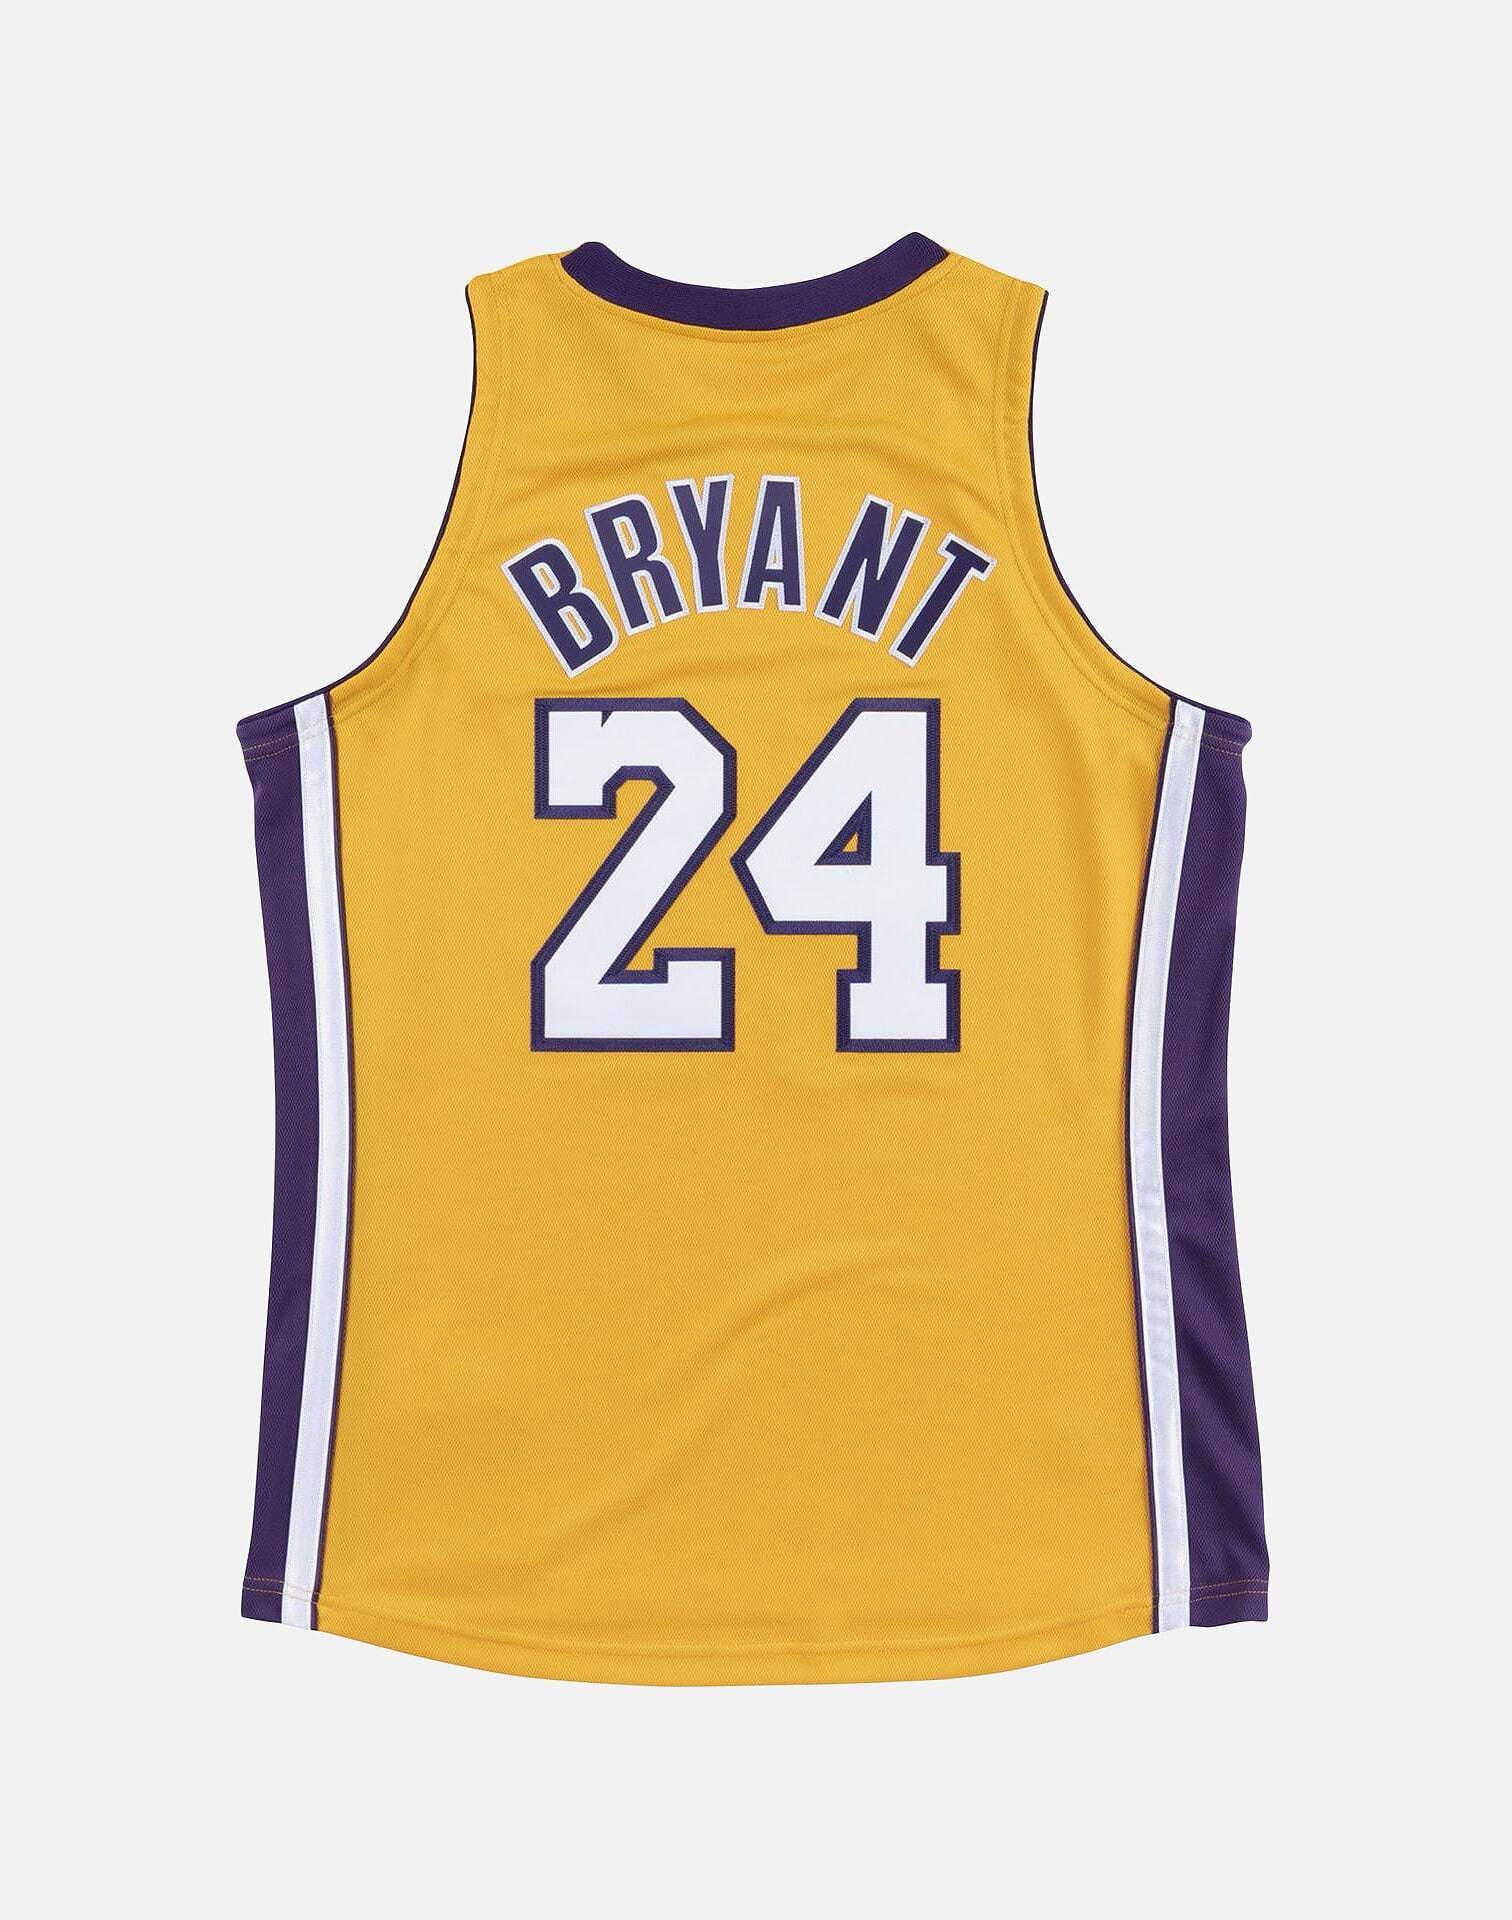 Kobe Bryant LA Galaxy Jersey #24 Tribute for Sale in Paramount, CA - OfferUp